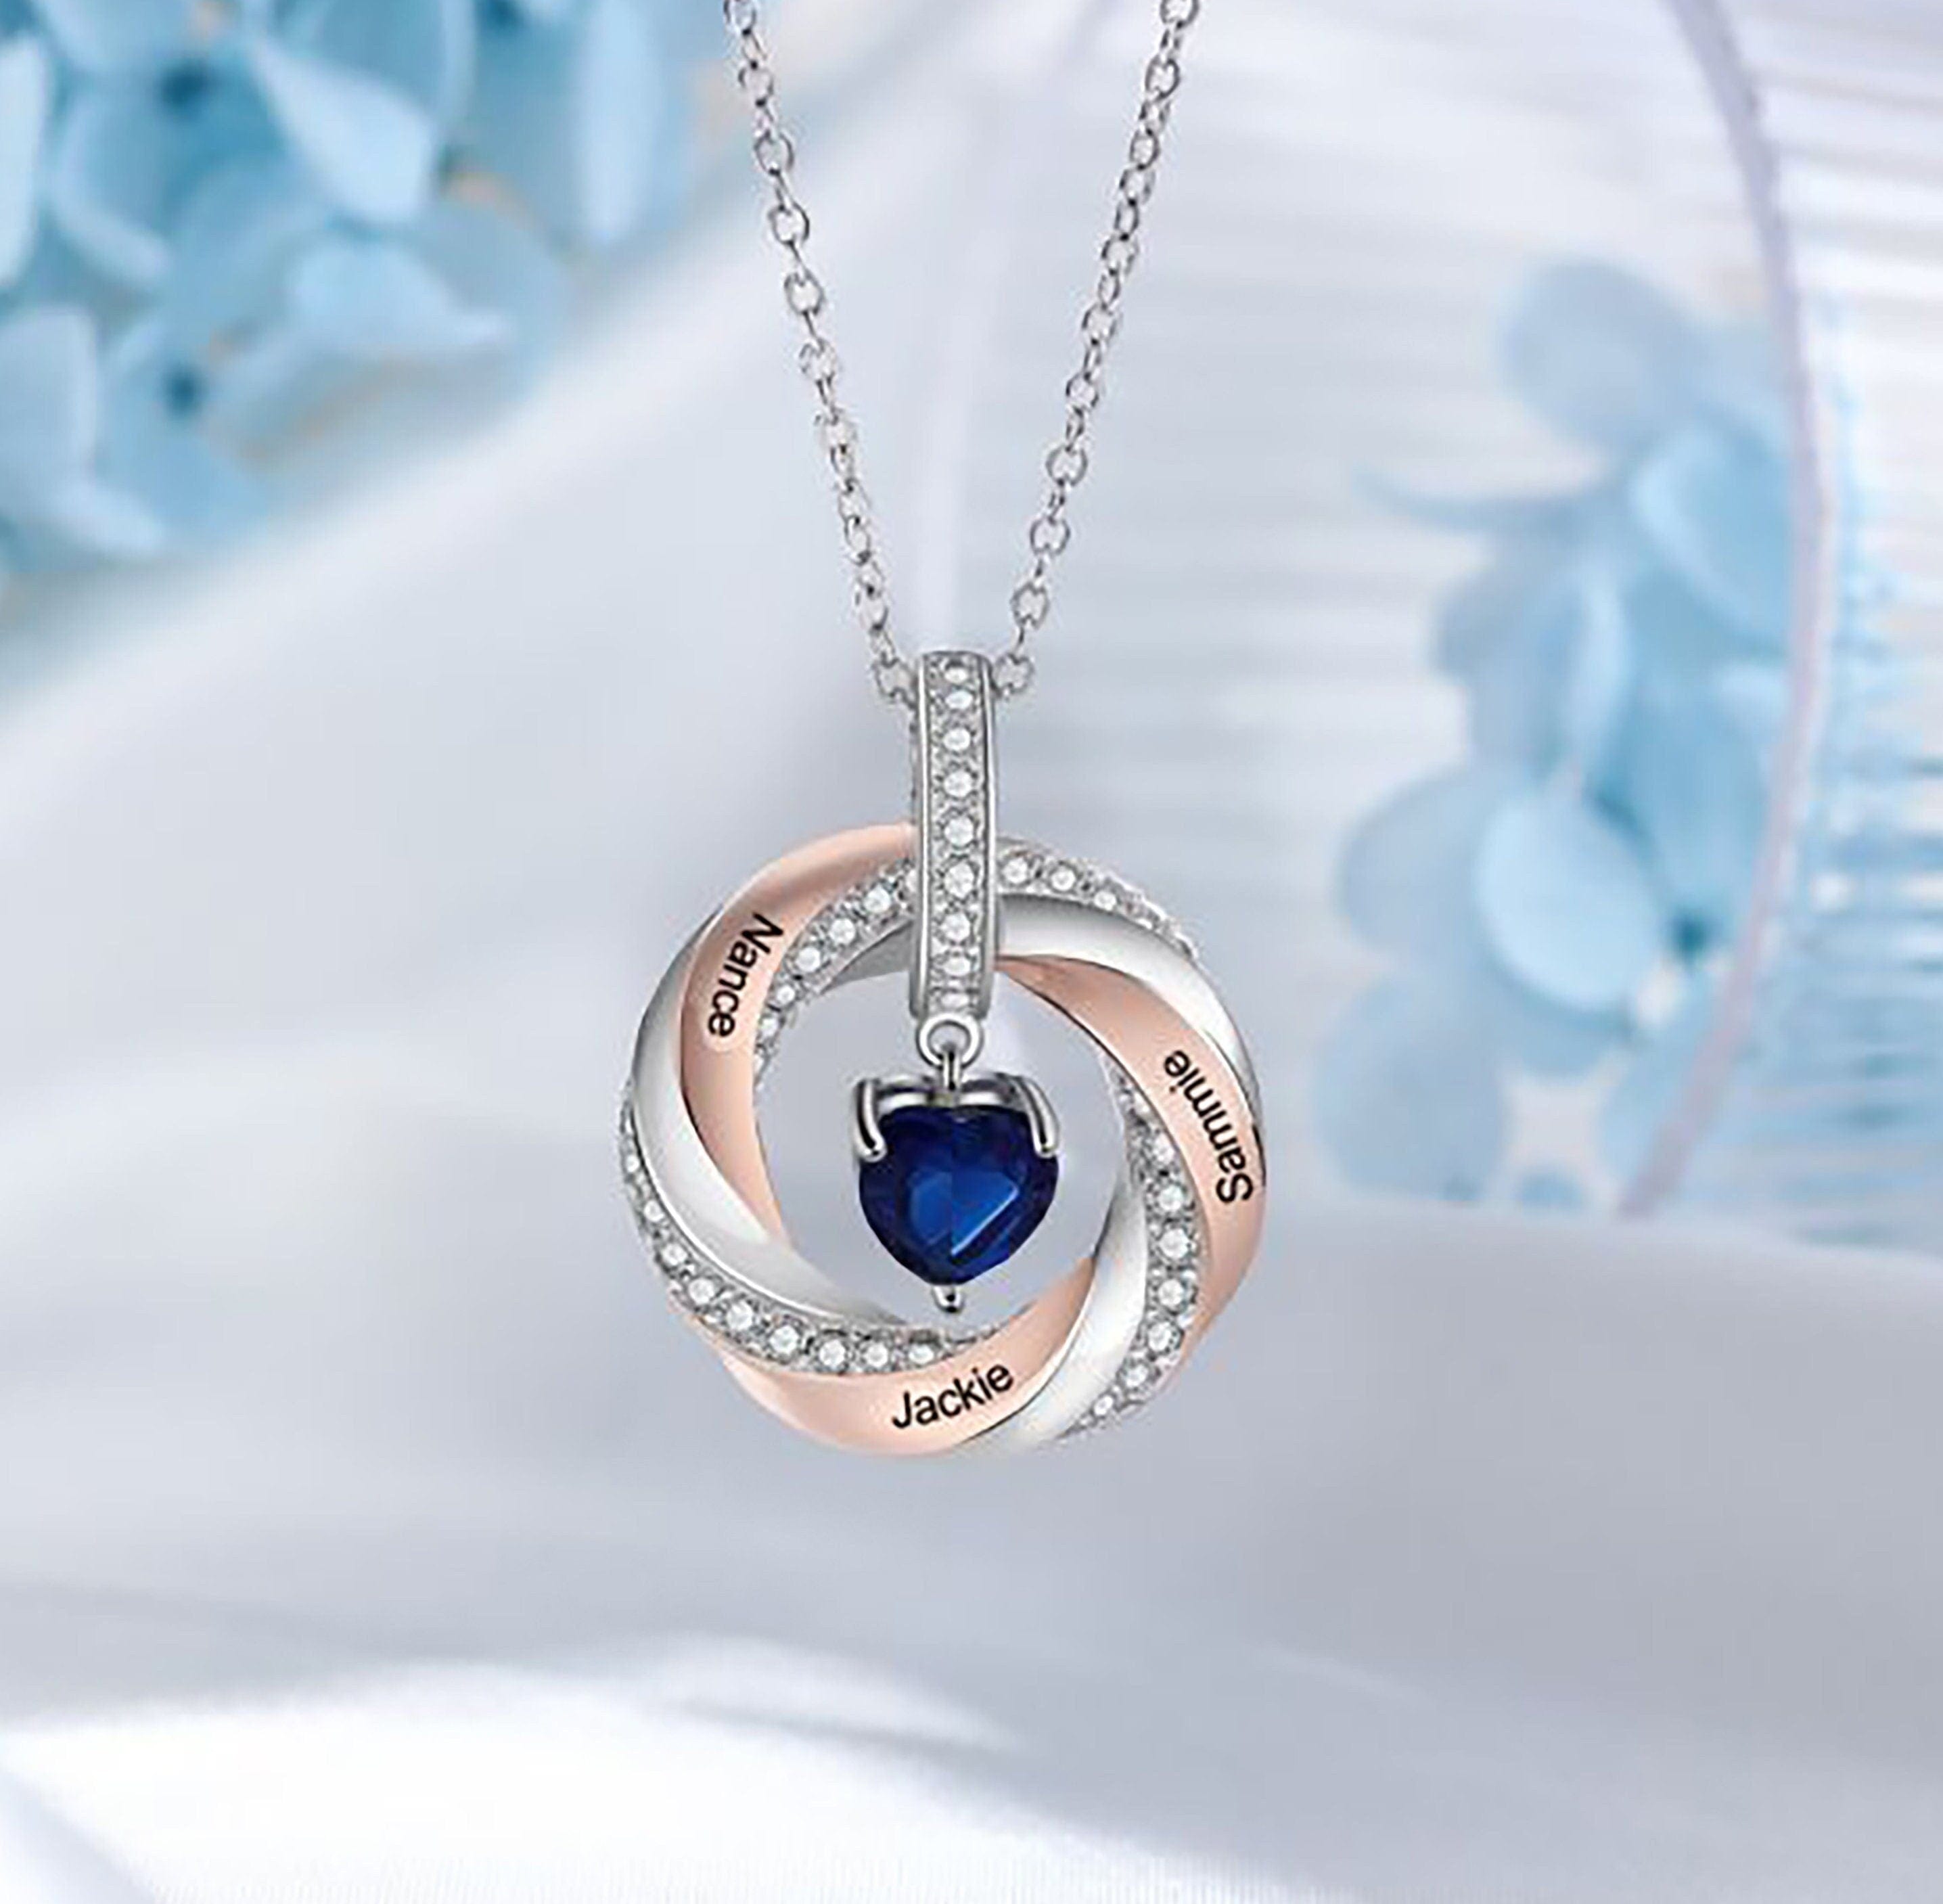 Mother's Circle Necklace With Gemstones : 44095 : Arden Jewelers